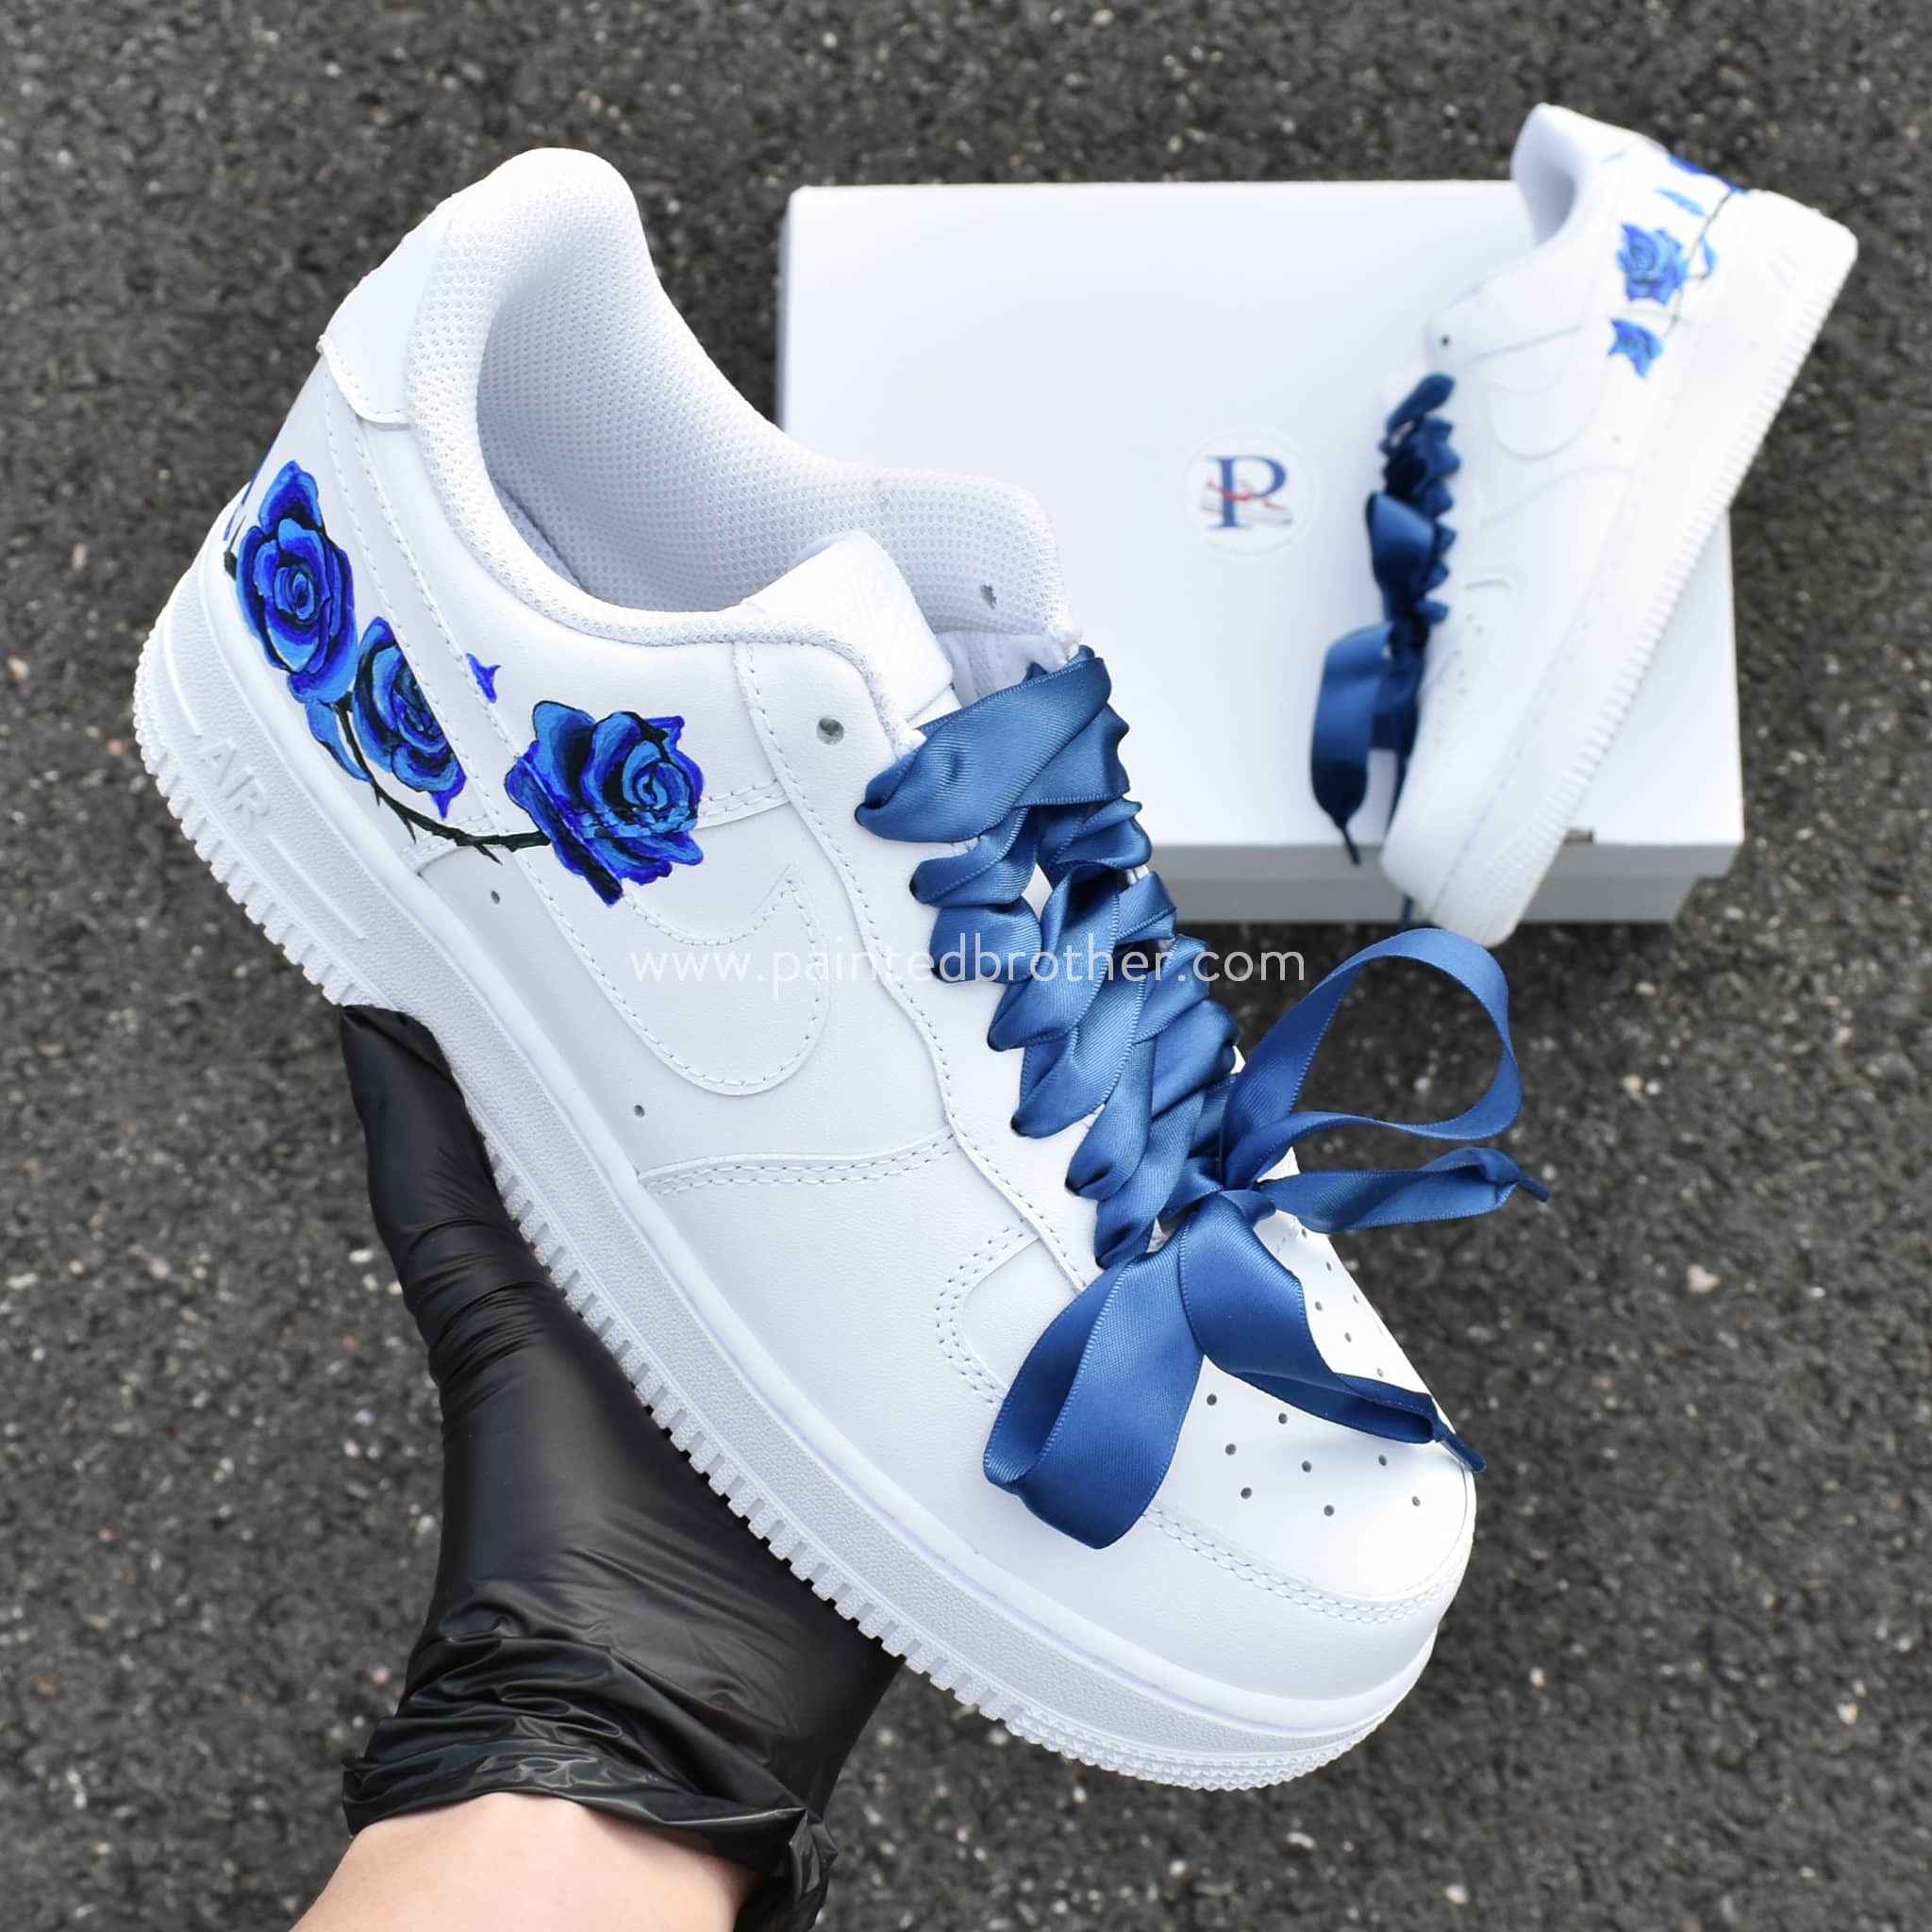 Cusom Shoes Delicate Blue Rose Design Custom Nike Air Force 1-paintedbrother